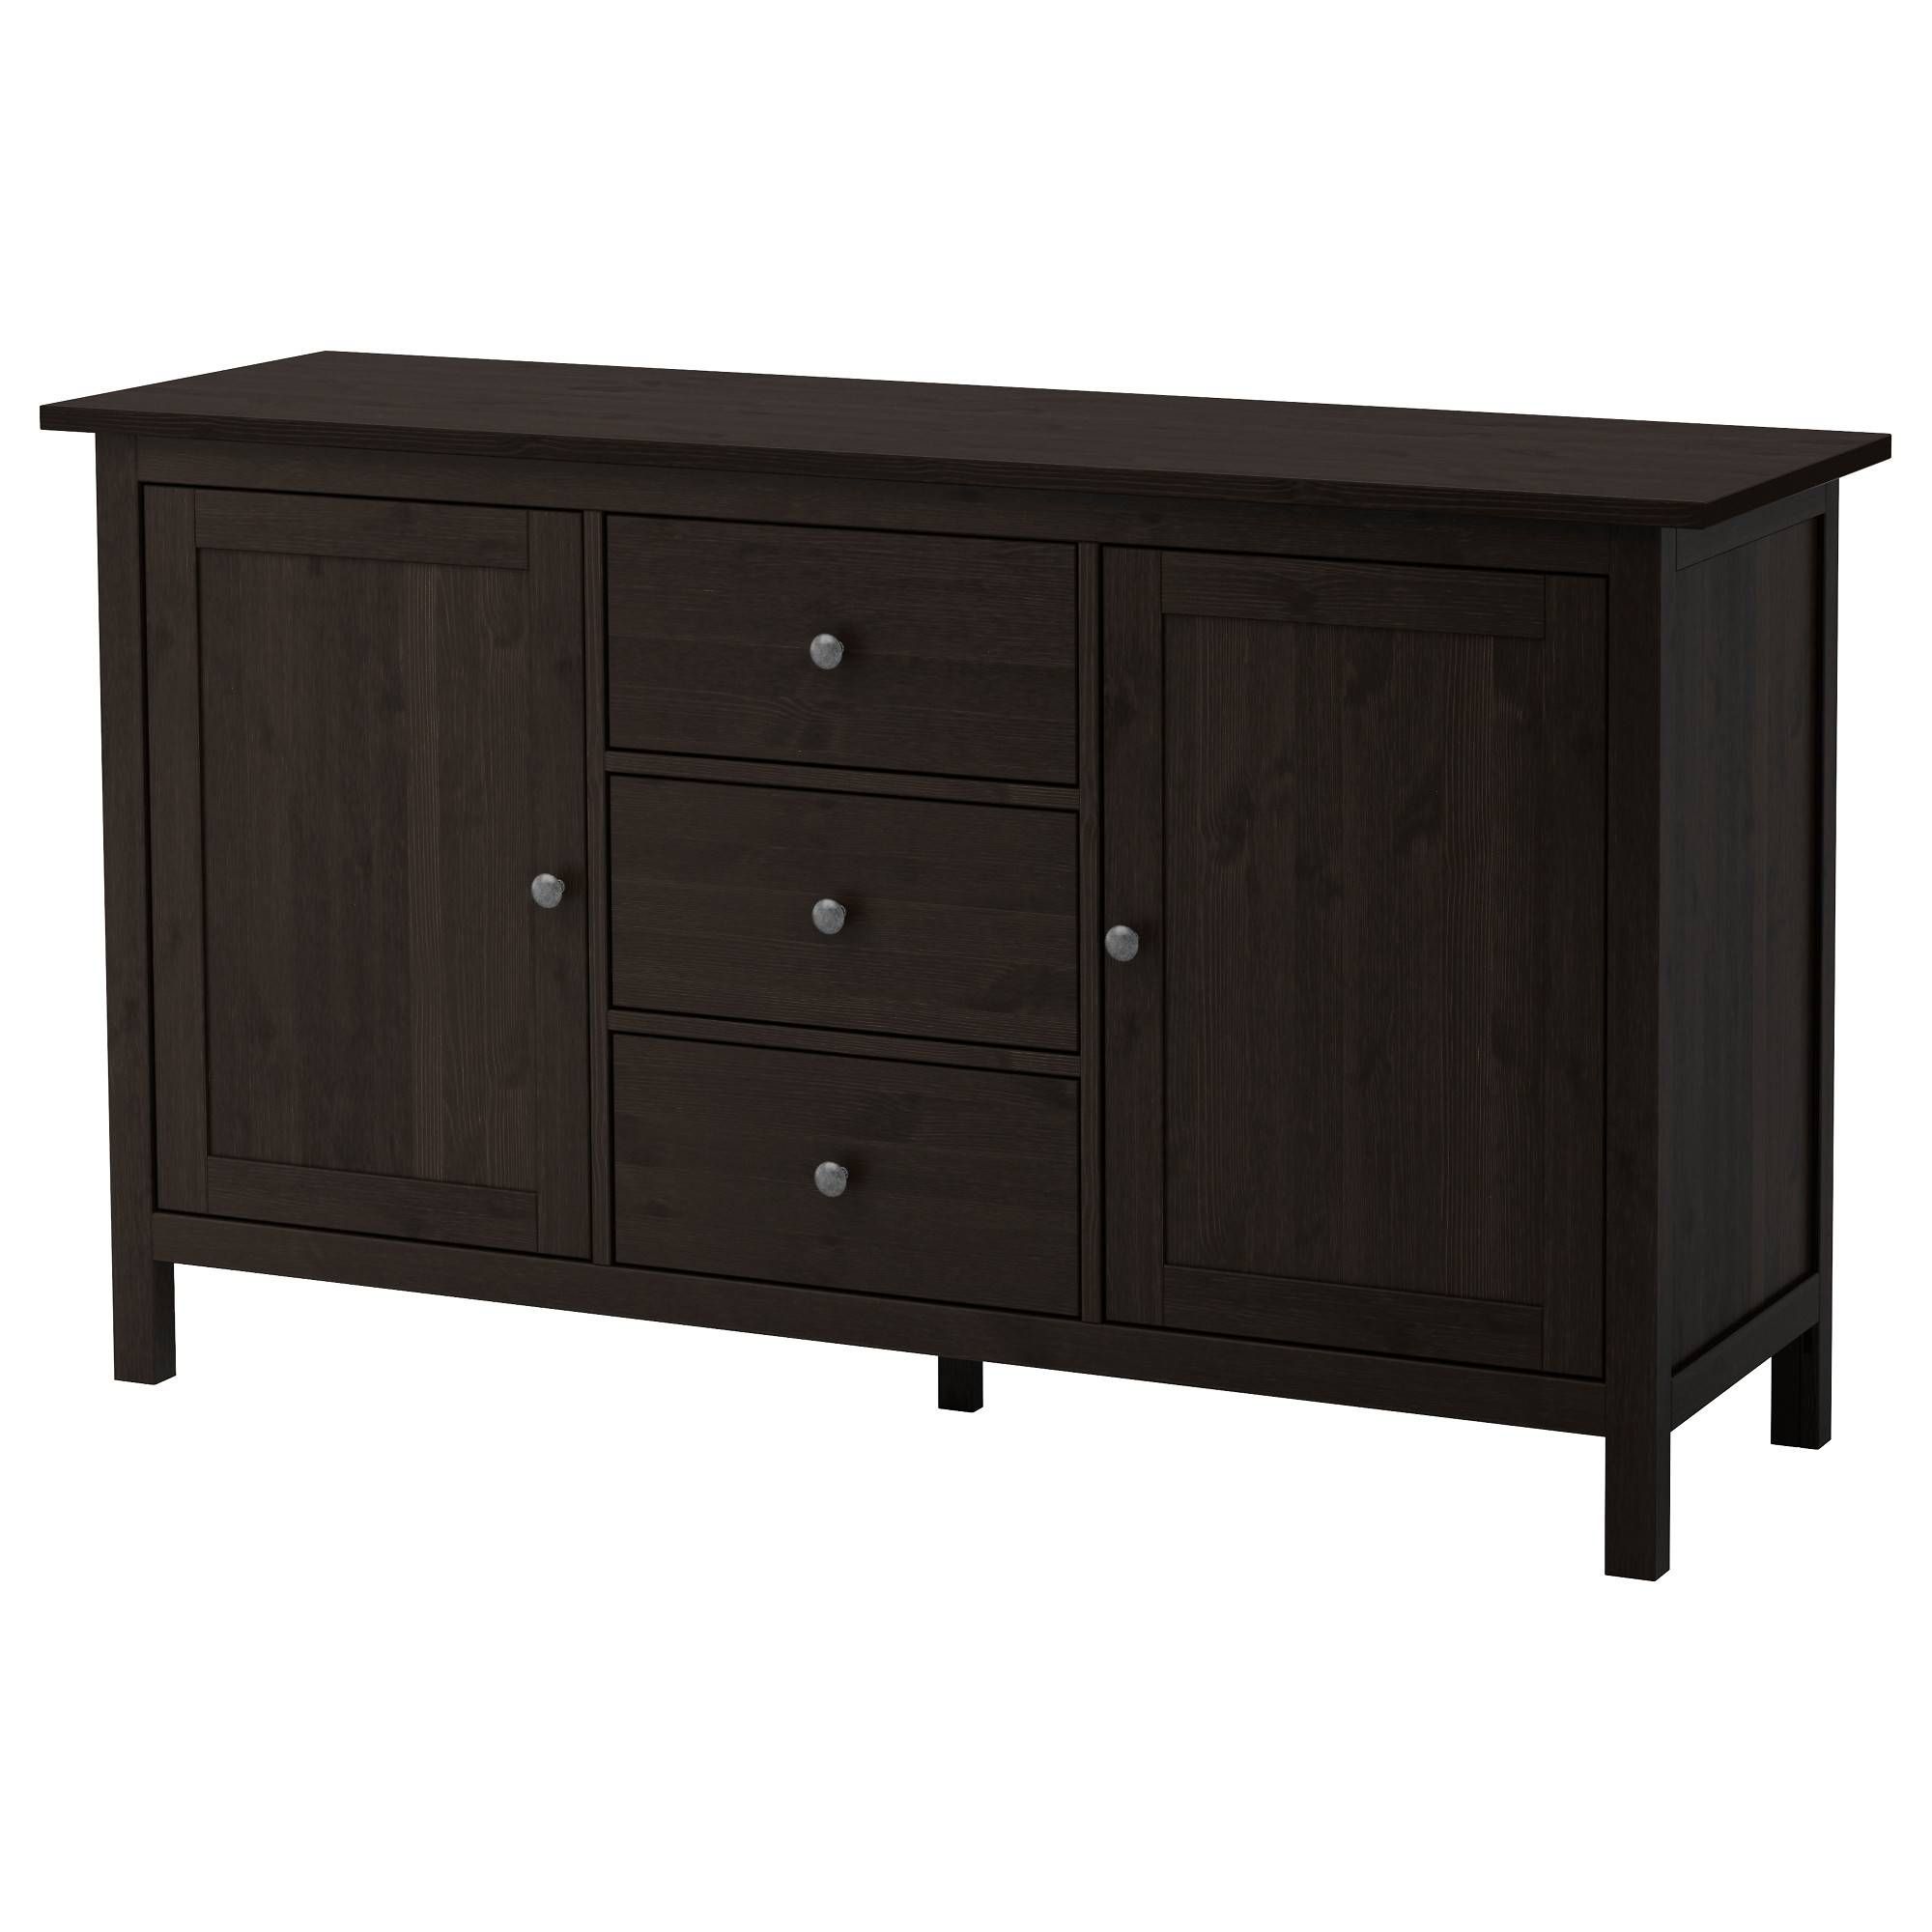 Hemnes Sideboard – Black Brown – Ikea For Most Recent Ikea Sideboards (View 10 of 15)